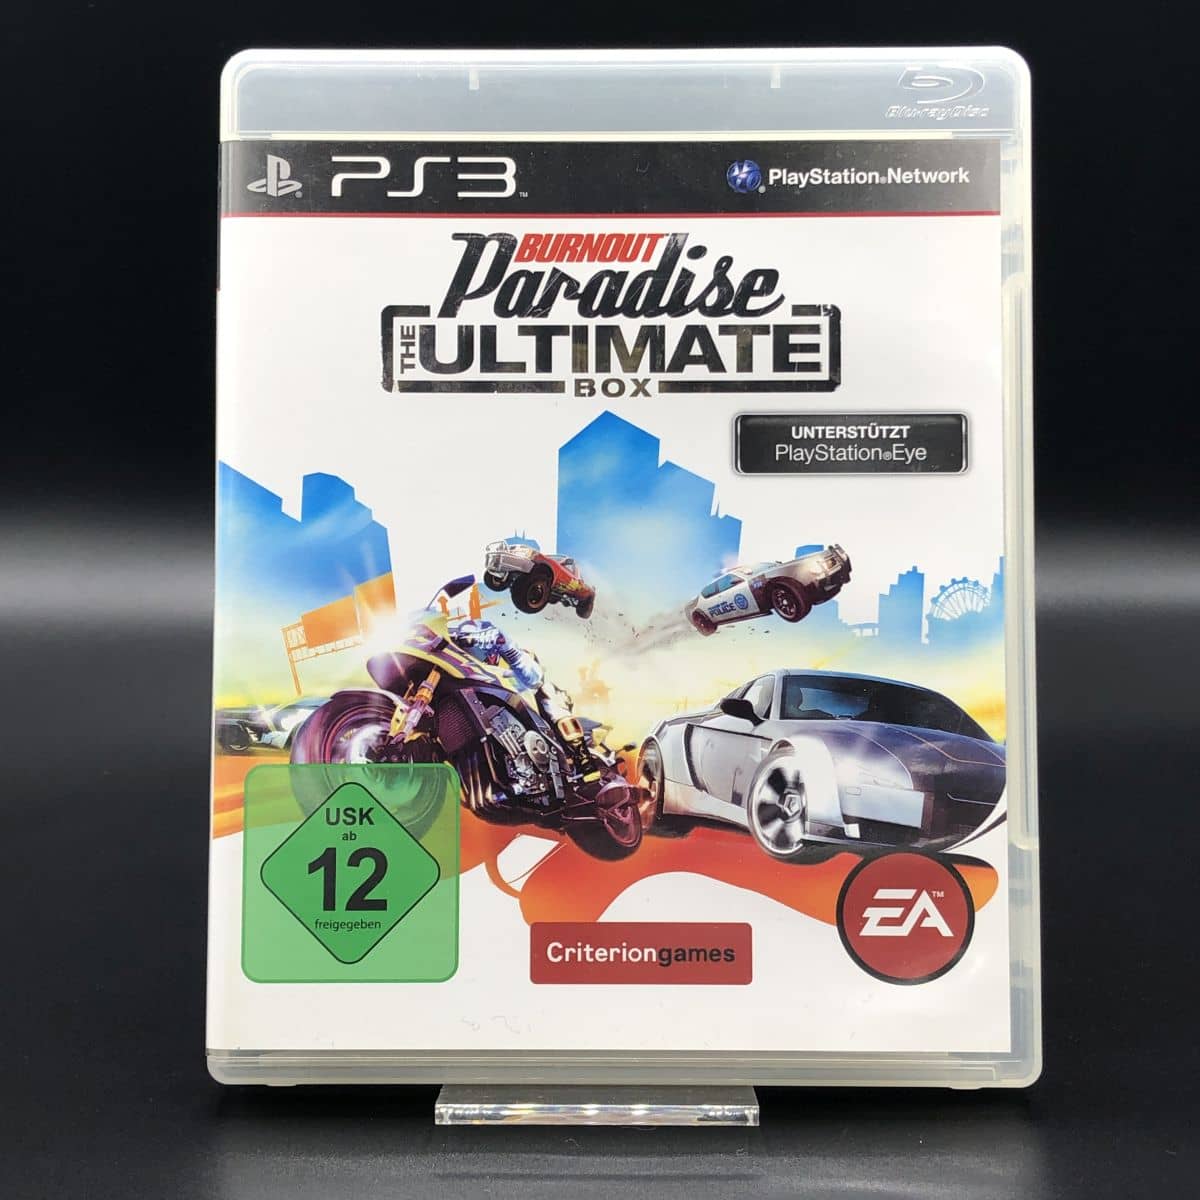 PS3 Burnout Paradise (Ultimate Box) (Komplett) (Sehr gut) Sony PlayStation 3